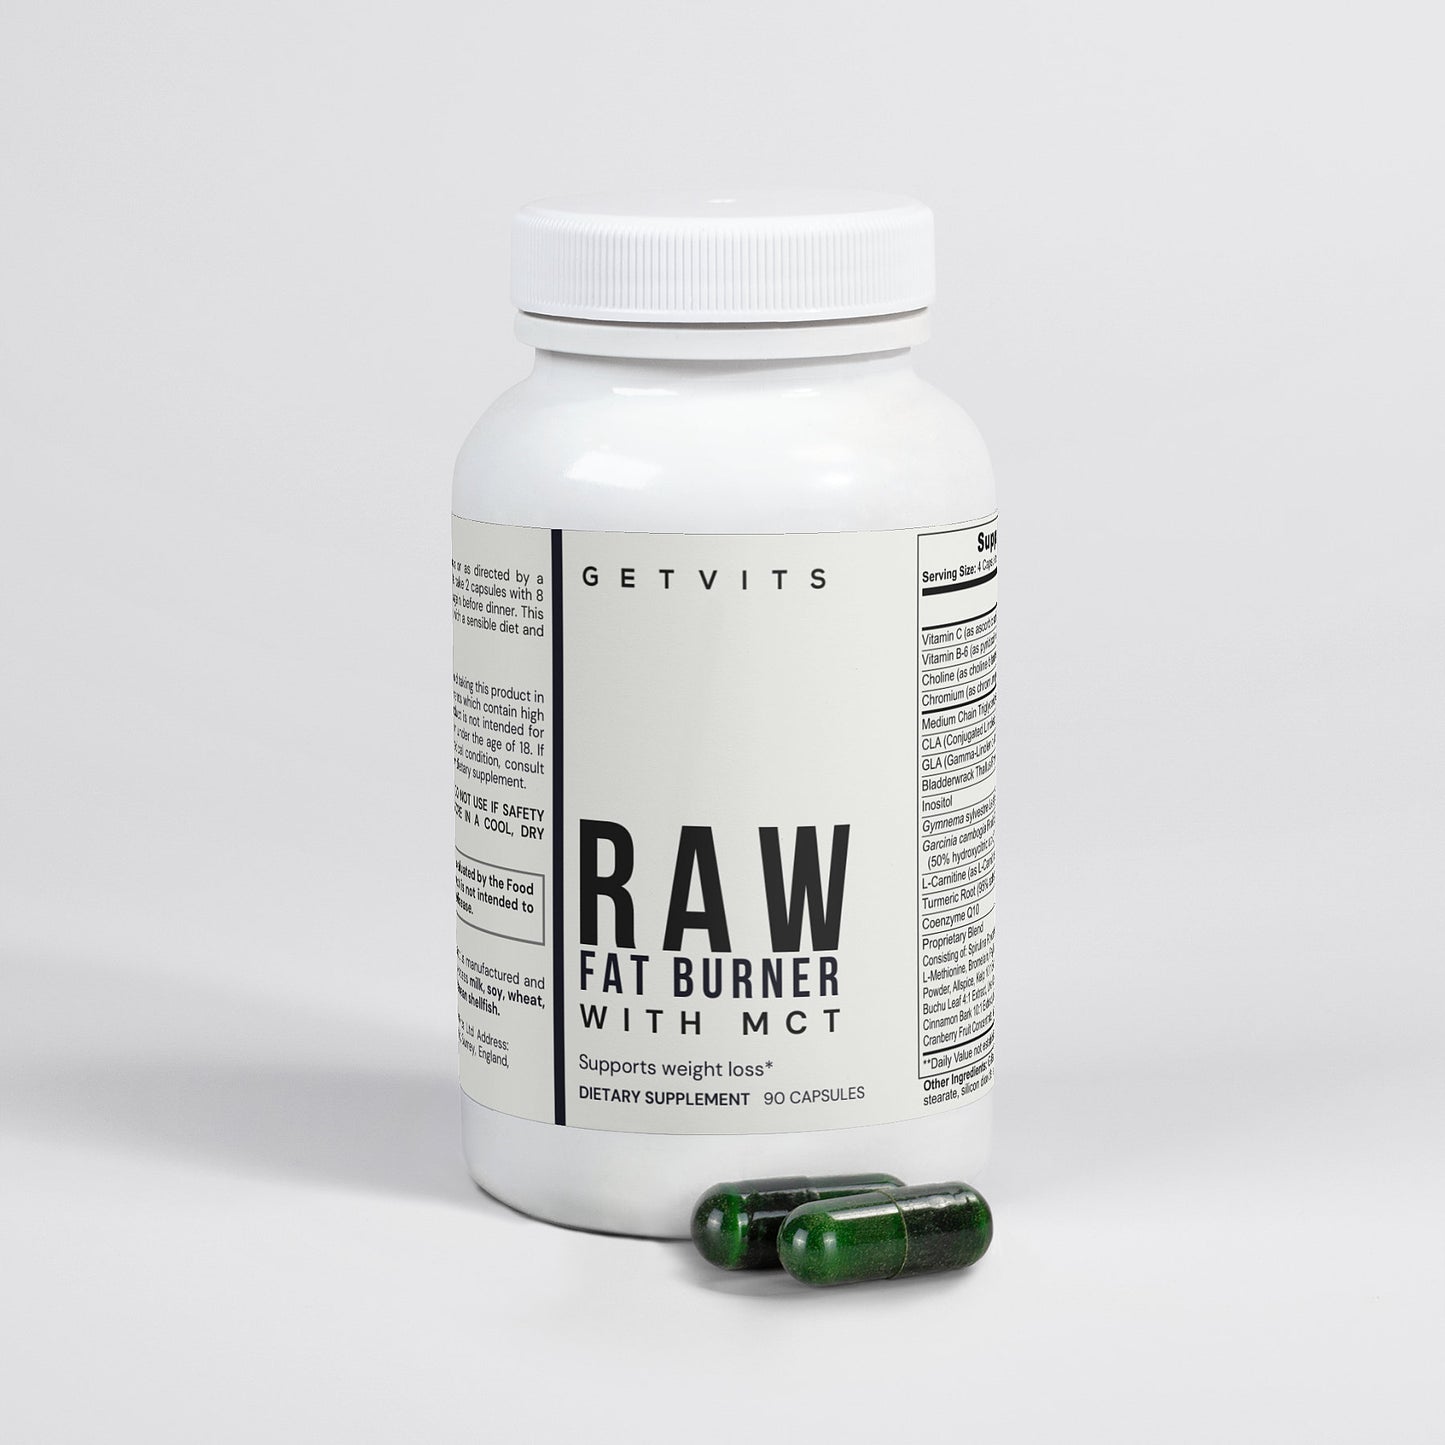 RAW Fat Burner with MCT